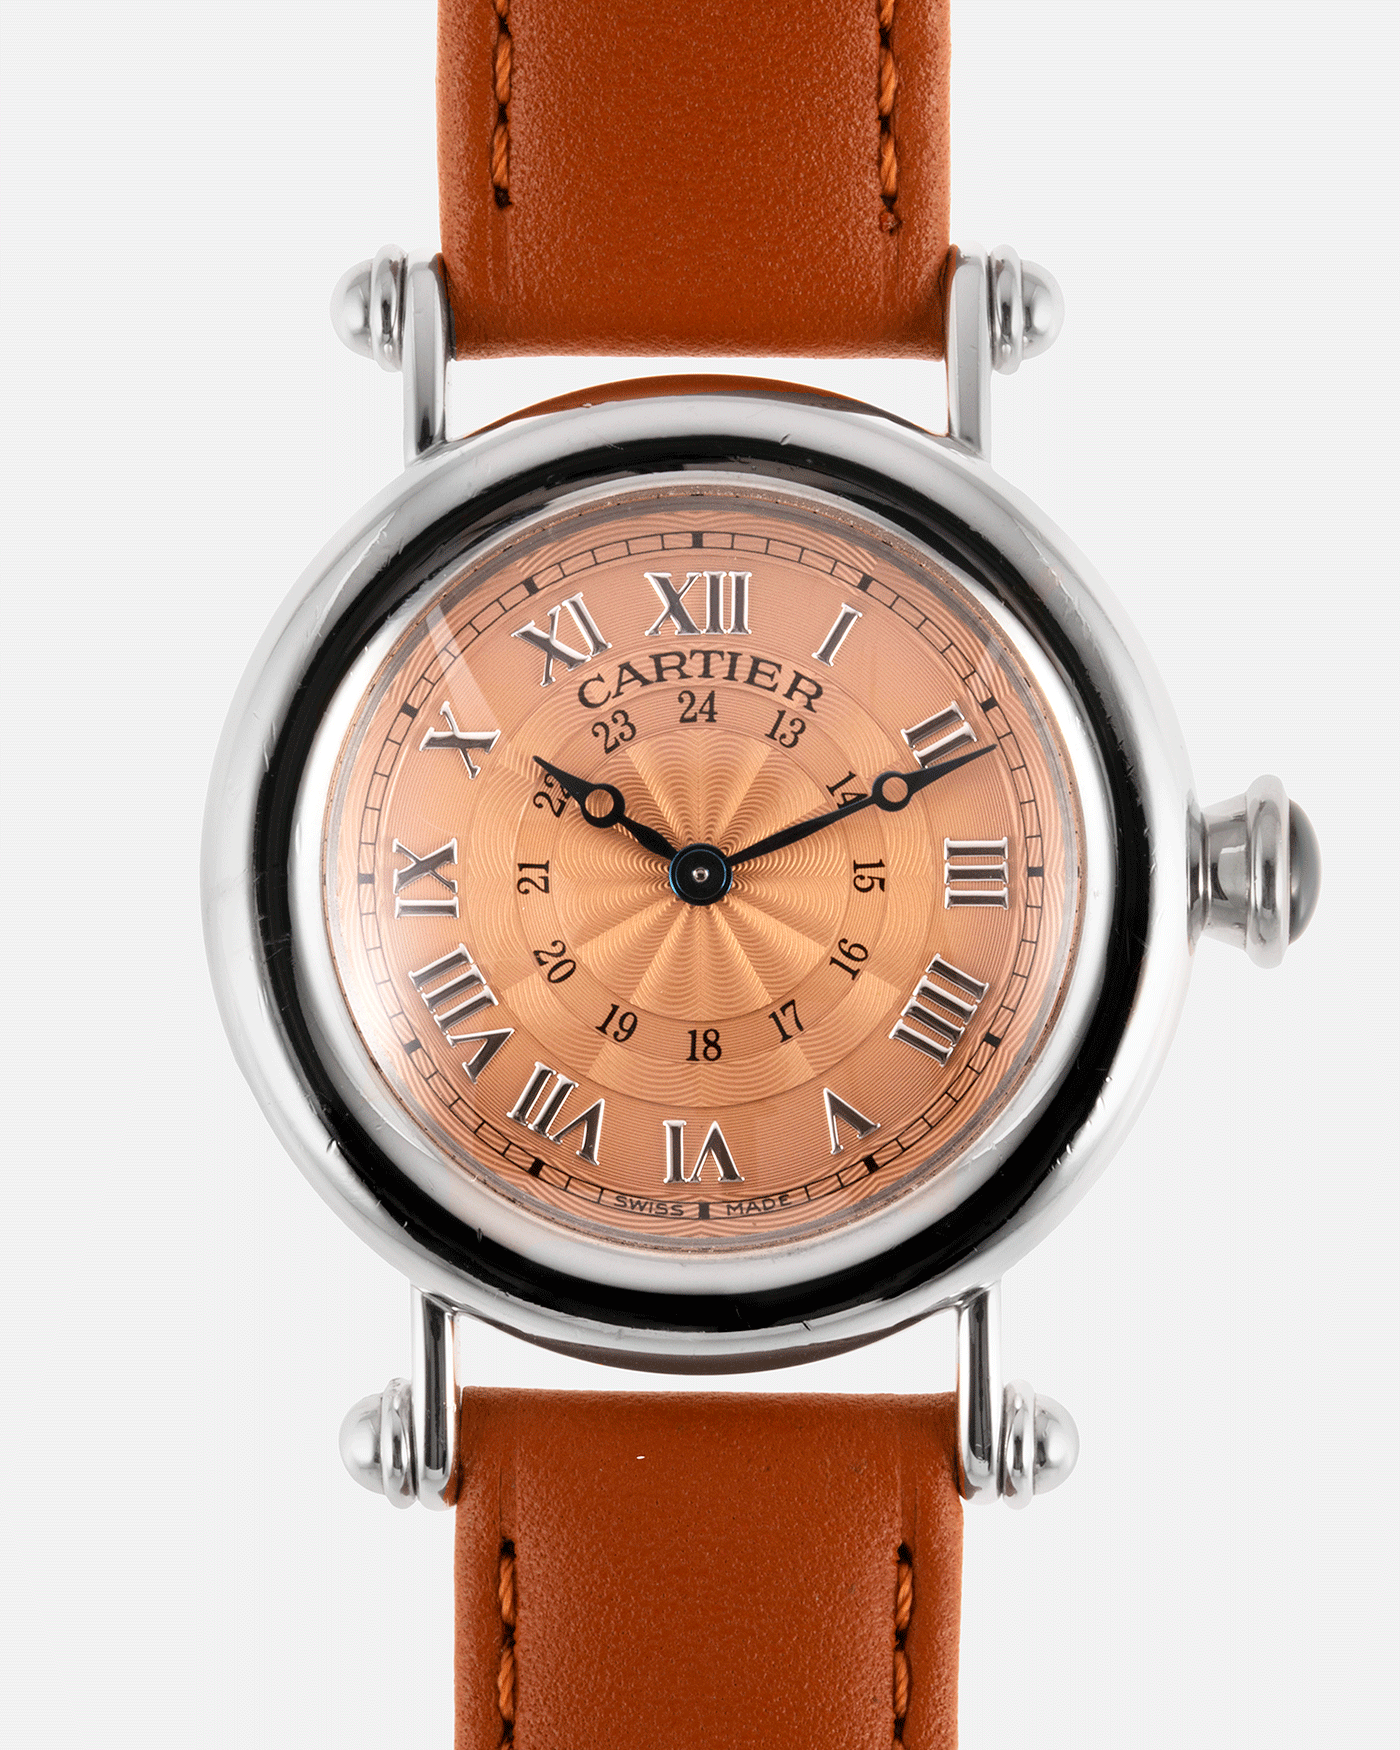 Brand: Cartier Year: 1990’s Model: Diabolo Salmon LE 50 Pieces Reference:1462 Material: Platinum Movement: Manually Wound Cartier Cal. 9P2 Case Diameter: 32mm Strap: Chestnut Carter Strap with 18k White Gold Deployant